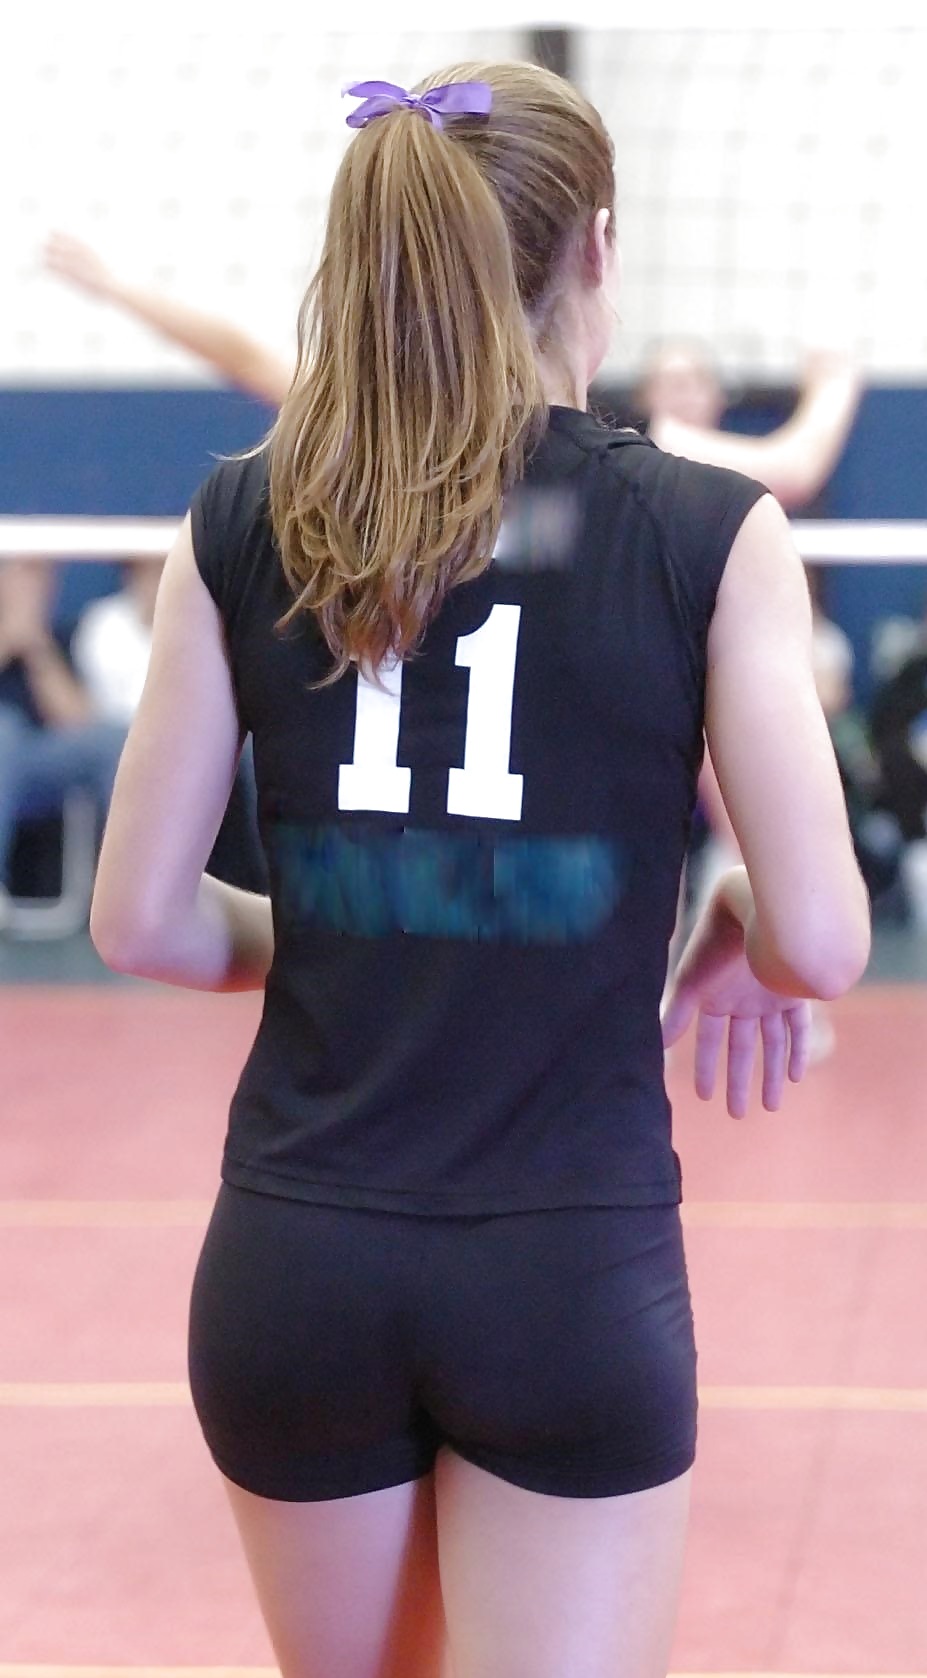 Volleyball Spandex Teenagers Ass Shorts Sport 50 Pics